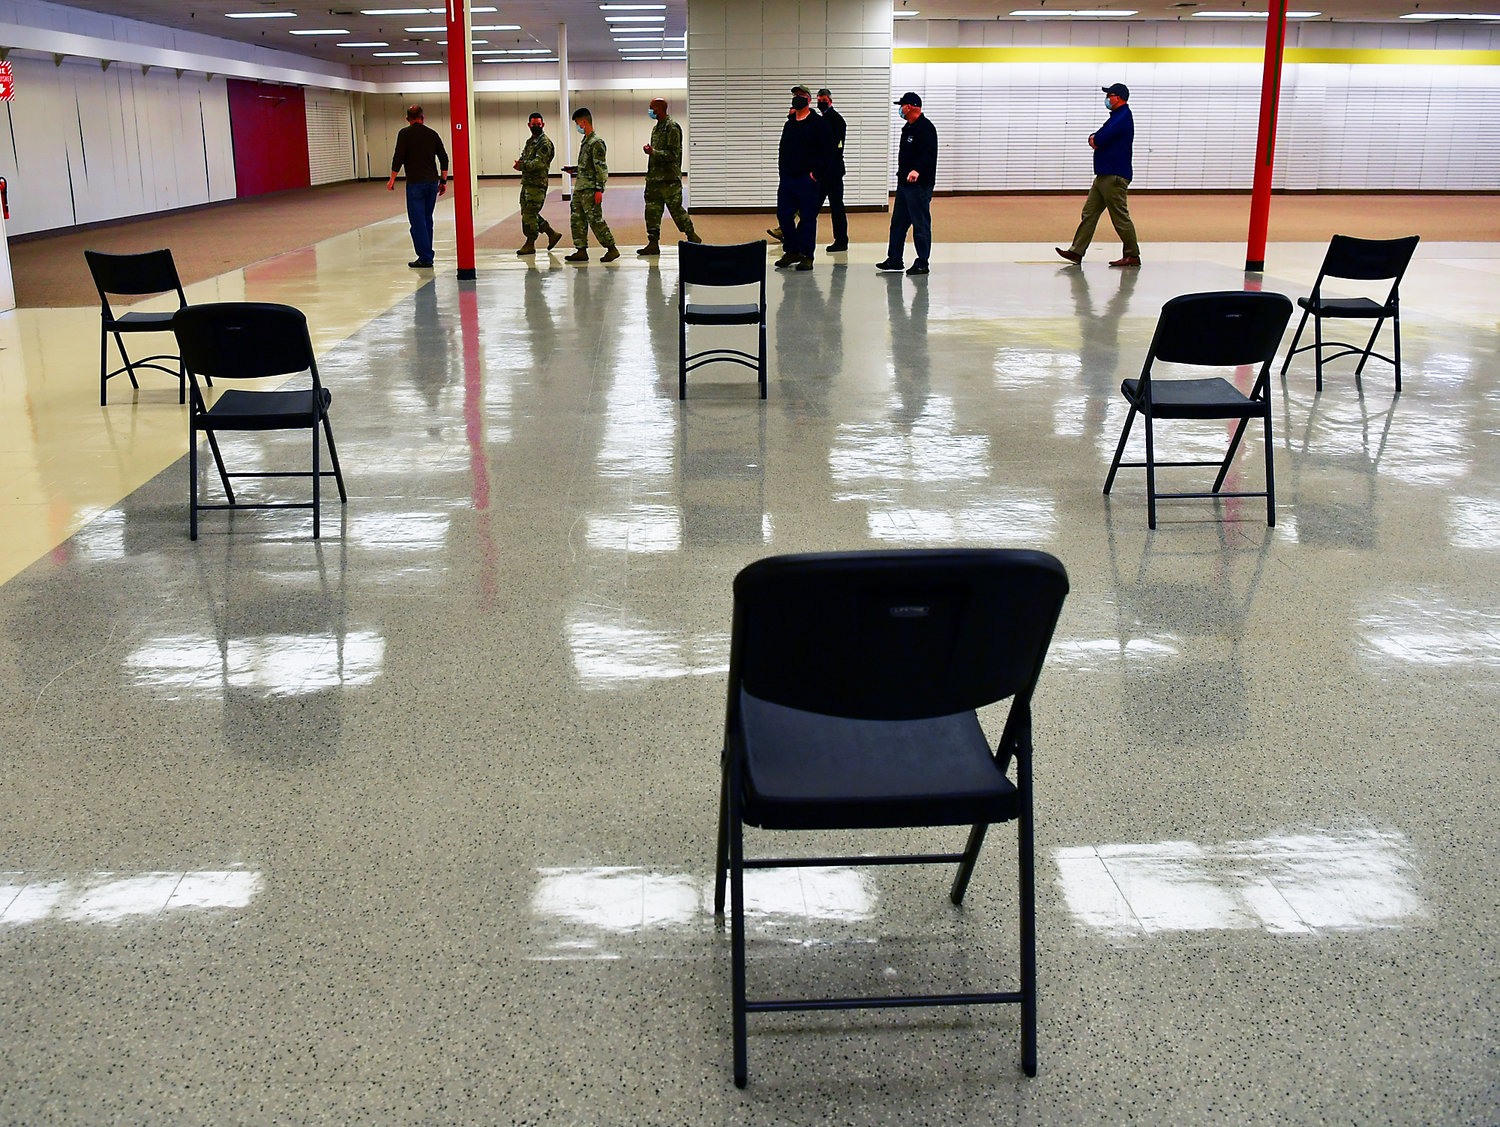 Chairs are carefully placed and distanced on Tuesday, April, 27, in preparation for Wednesday’s Public Walk-in Covid-19 Vaccine Clinic to be held in the former Sears location in the Lewis County Mall. A variety of local officials toured the site on Tuesday to ensure its readiness for the clinic, which will be staffed by members of the Washington Army National Guard.